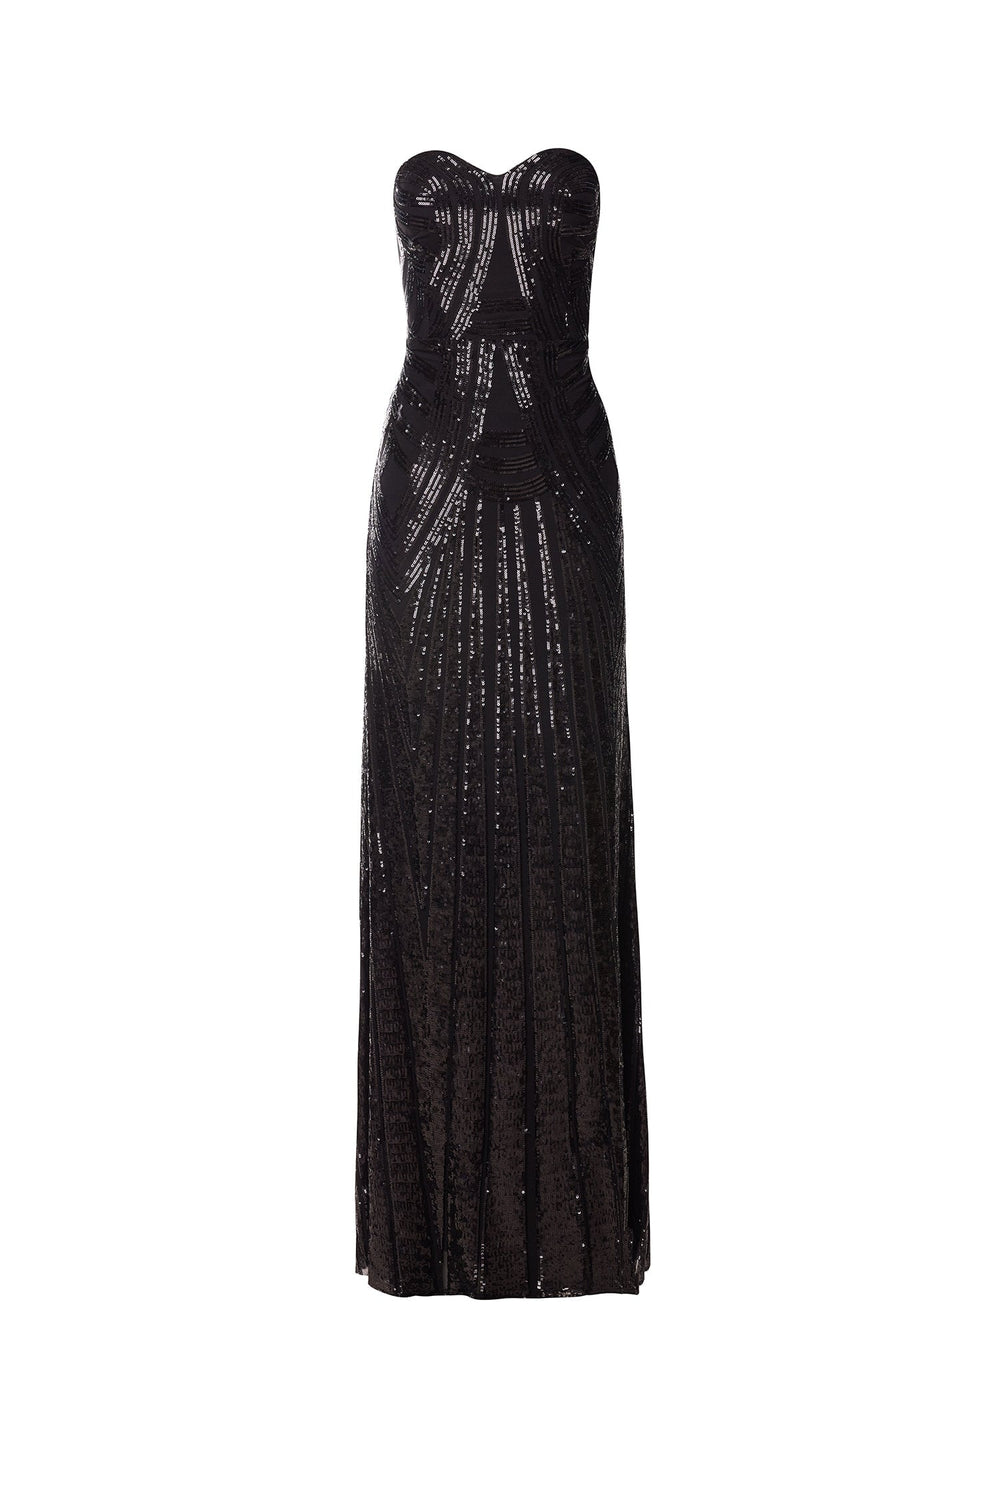 Saemira - Black Sequin Strapless Gown with Sweetheart Neckline